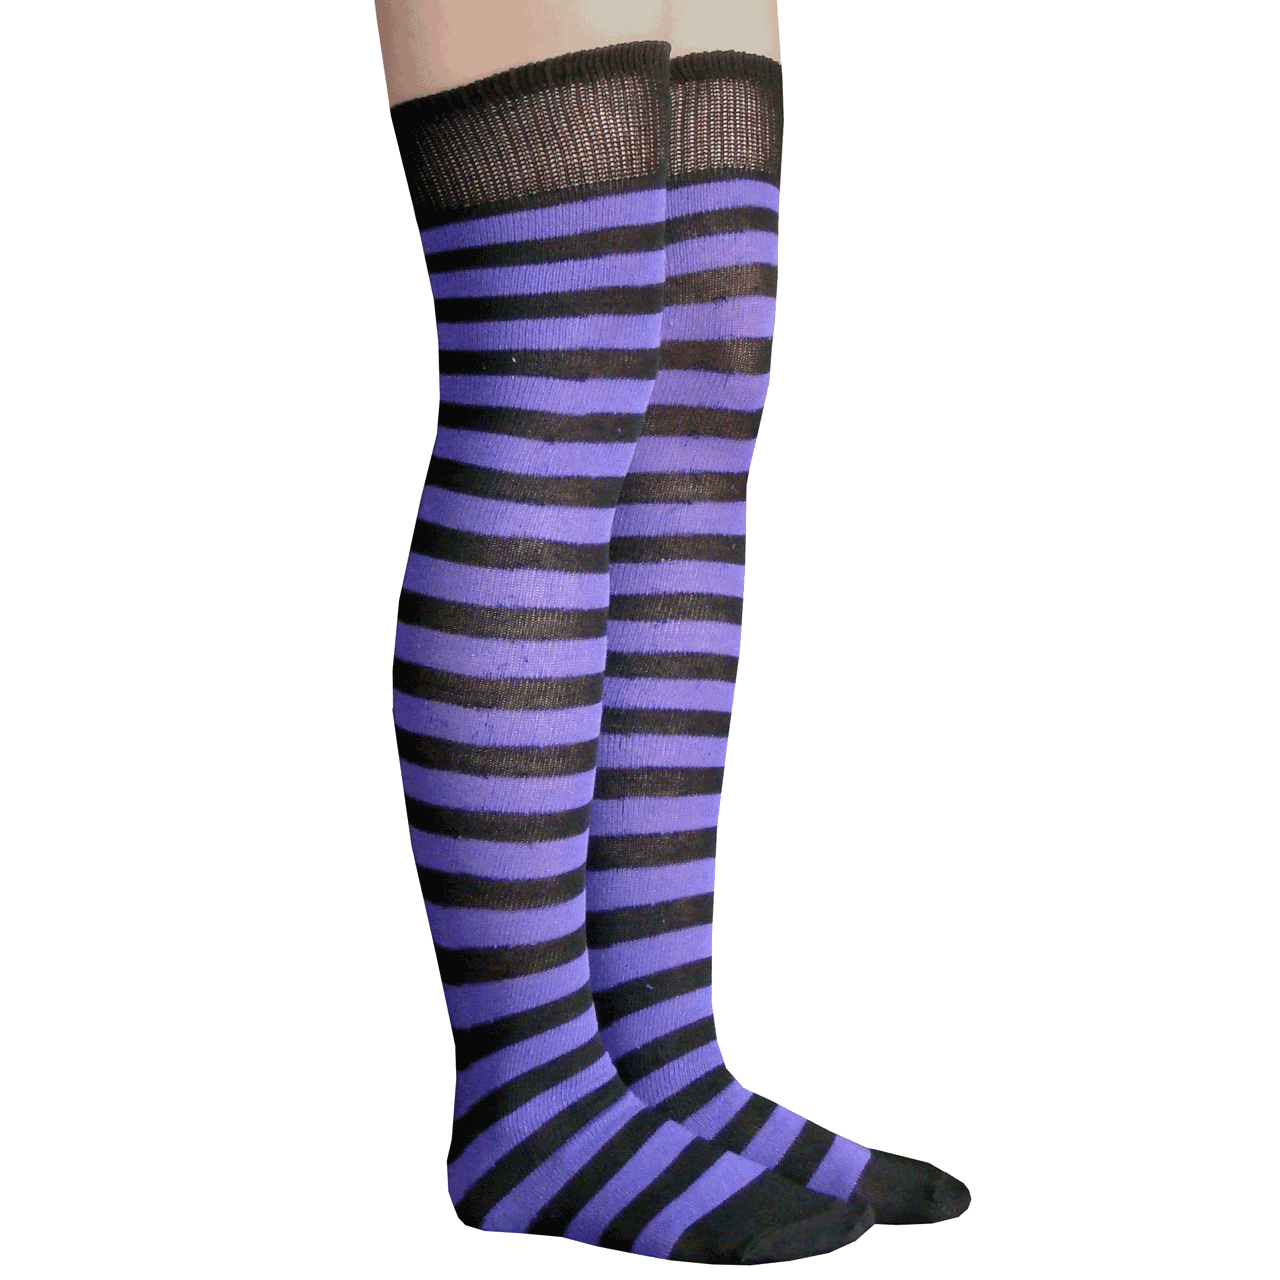 Missy's Product Reviews : Chrissy’s Knee High Socks